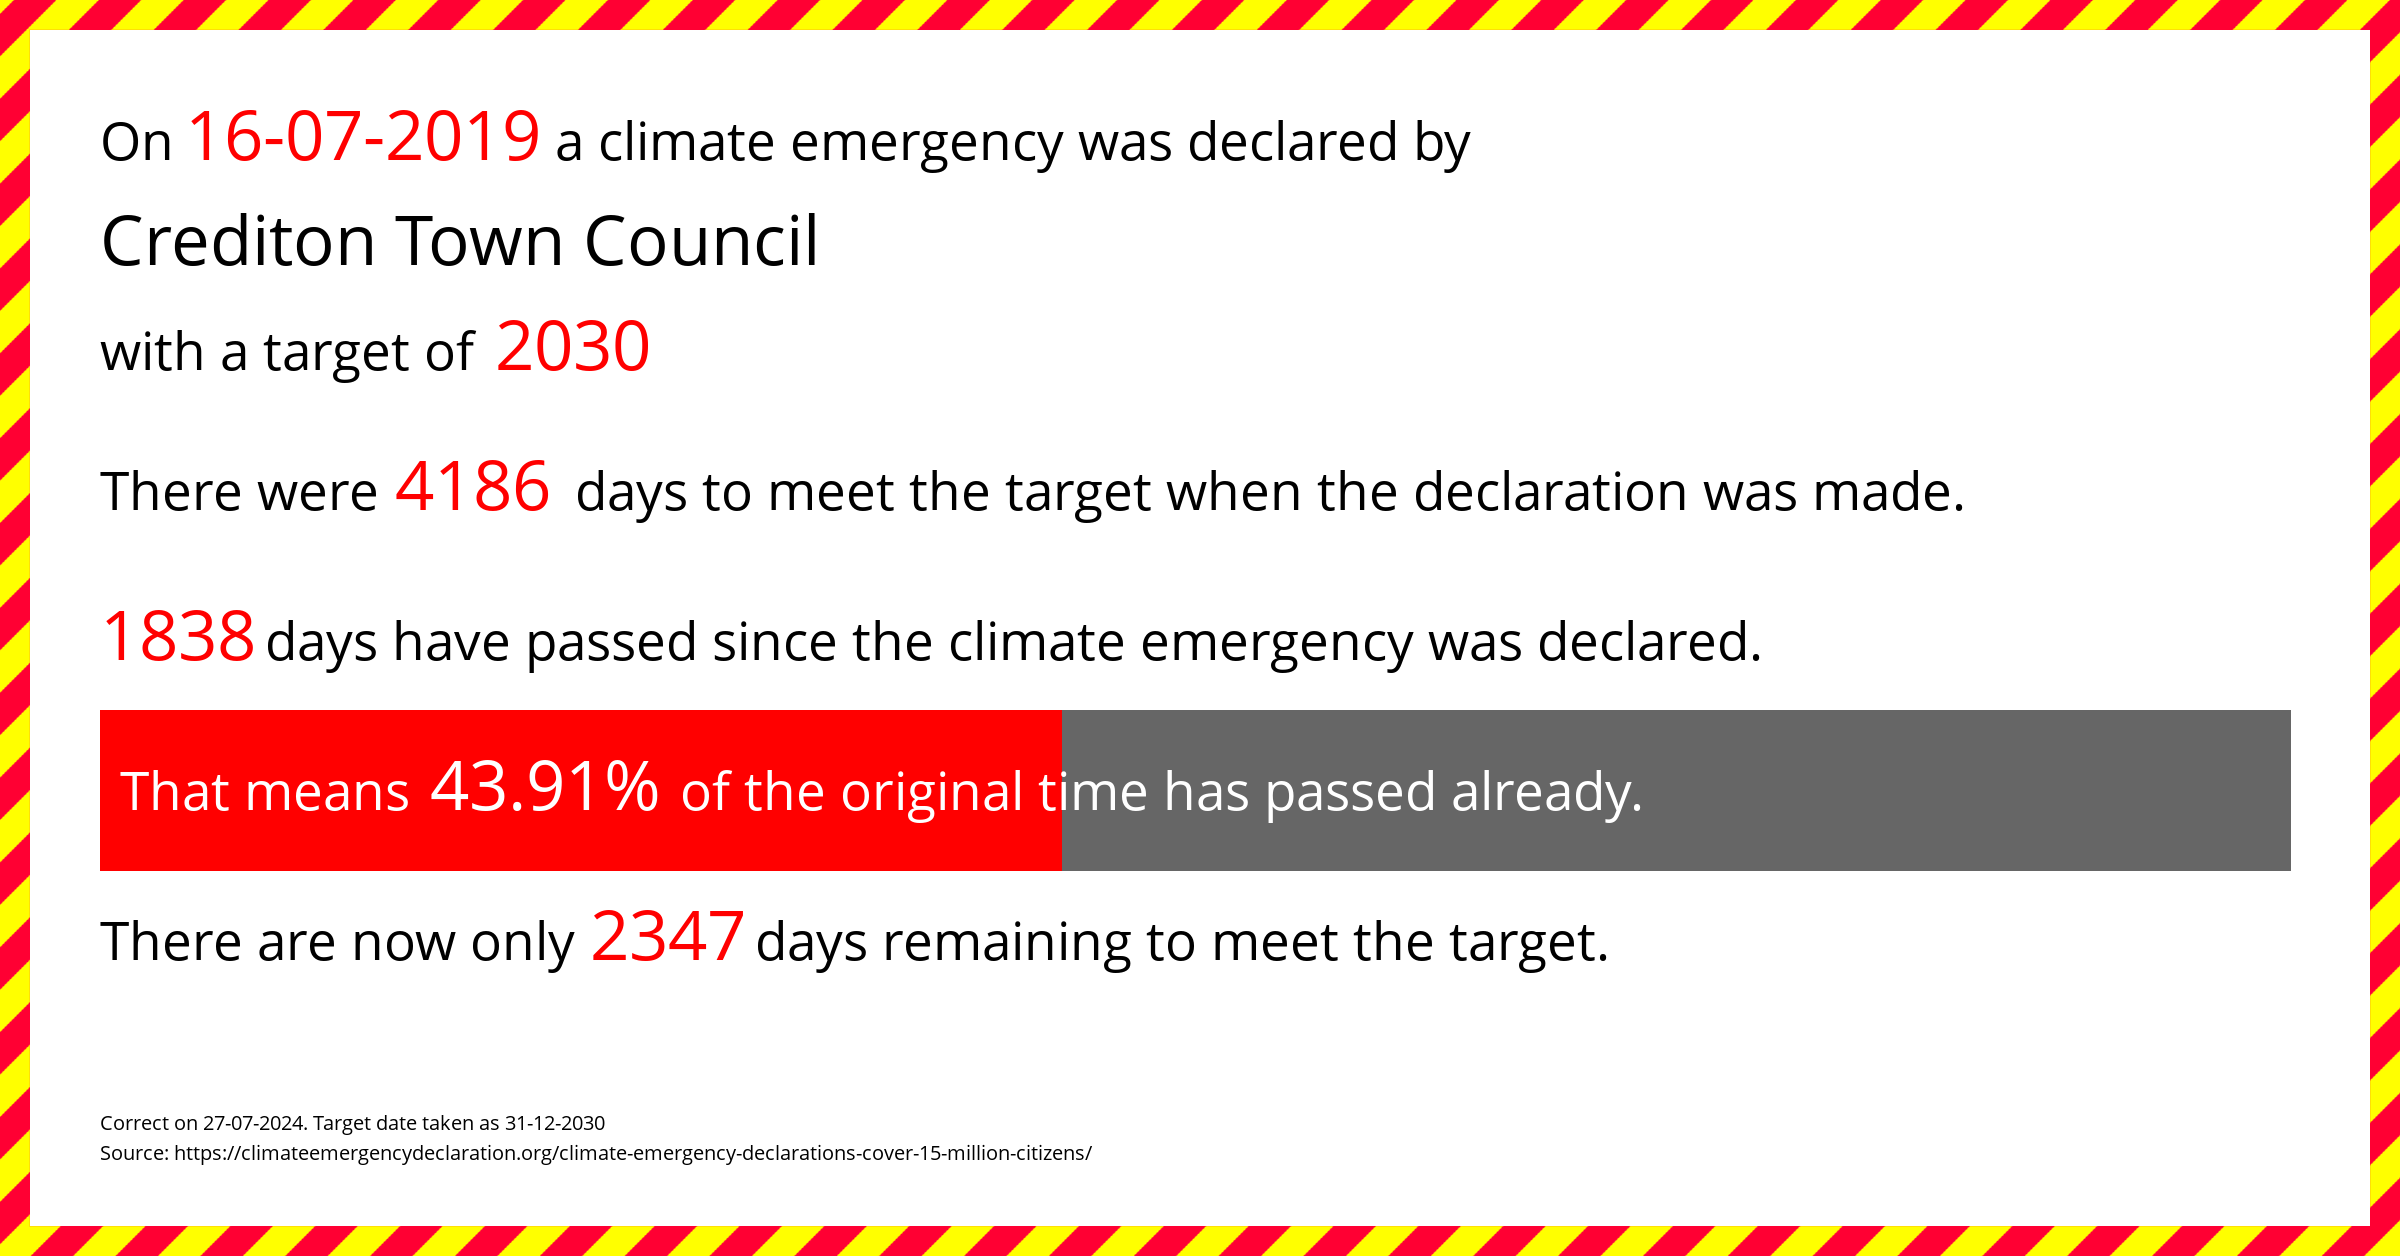 Crediton Town Council declared a Climate emergency on Tuesday 16th July 2019, with a target of 2030.